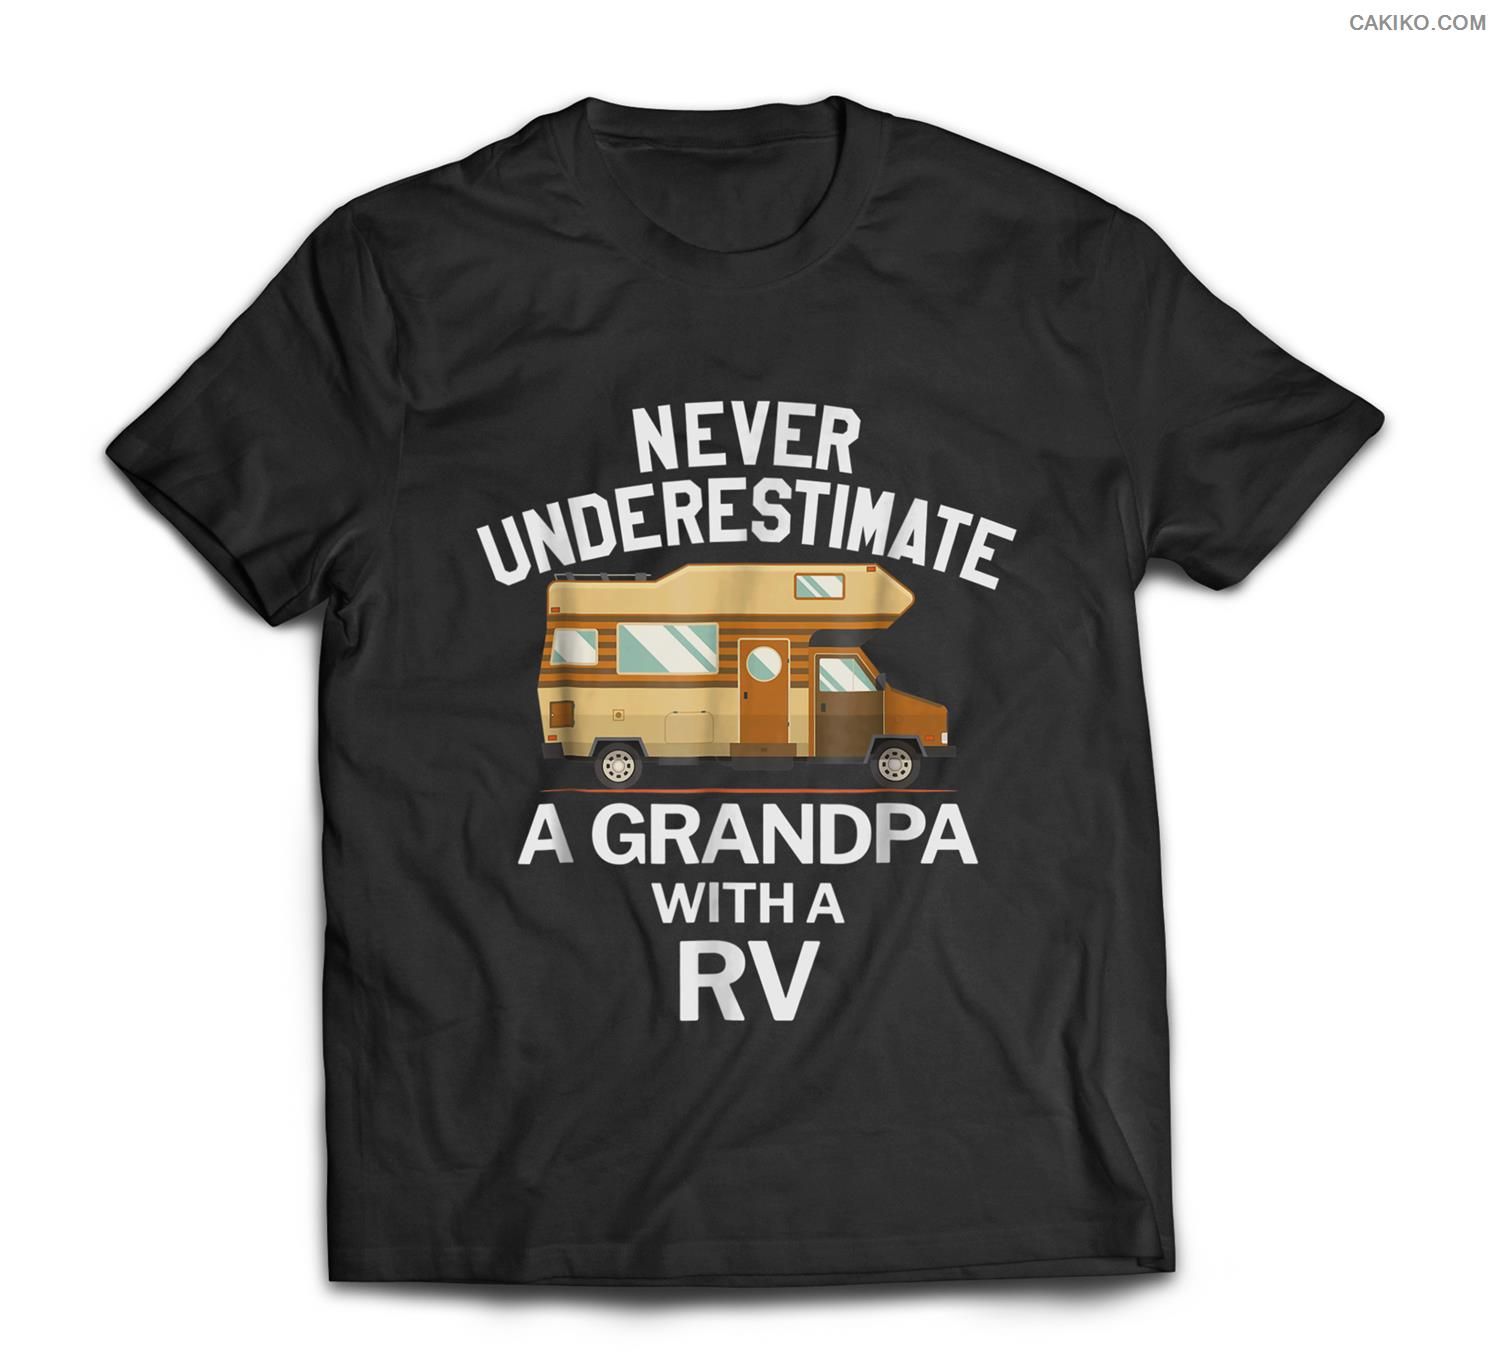 Never Underestimate A Grandpa With A Rv Funny T-Shirt